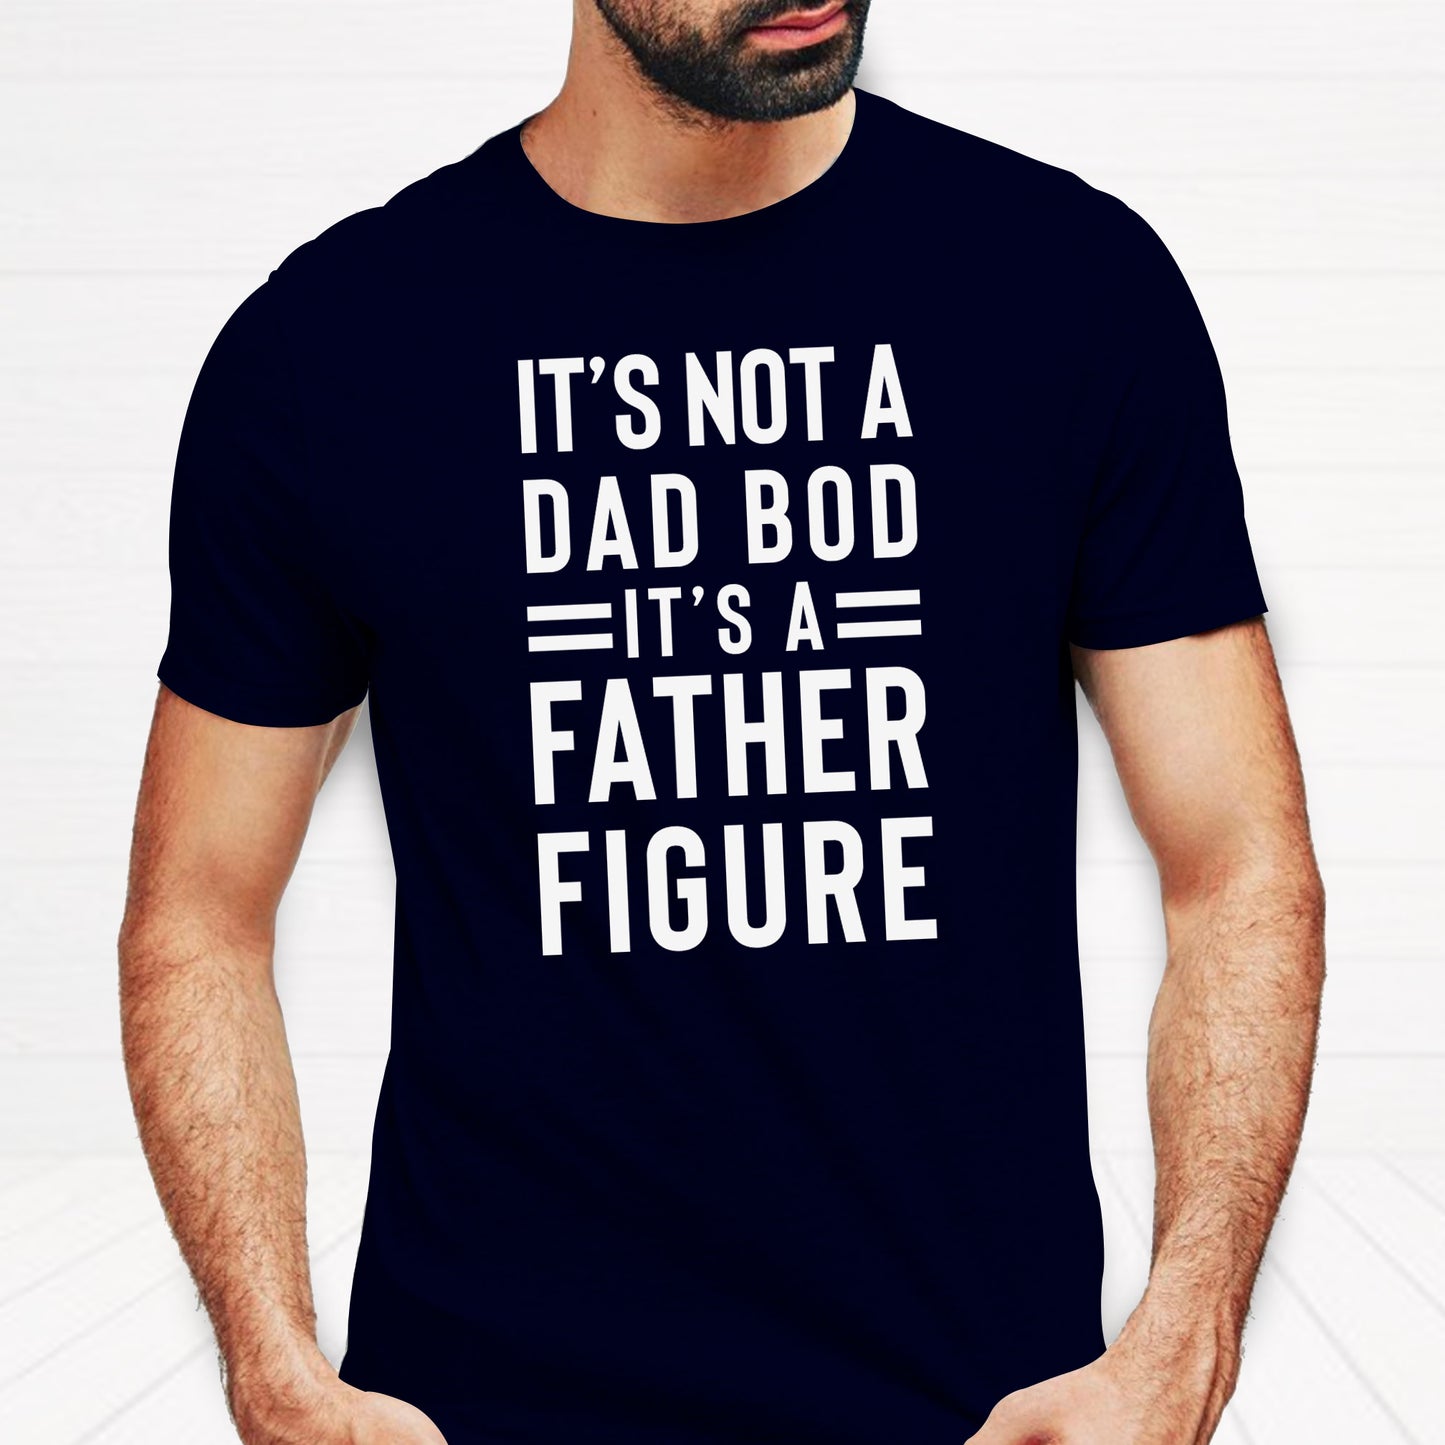 It's A Father Figure Tee